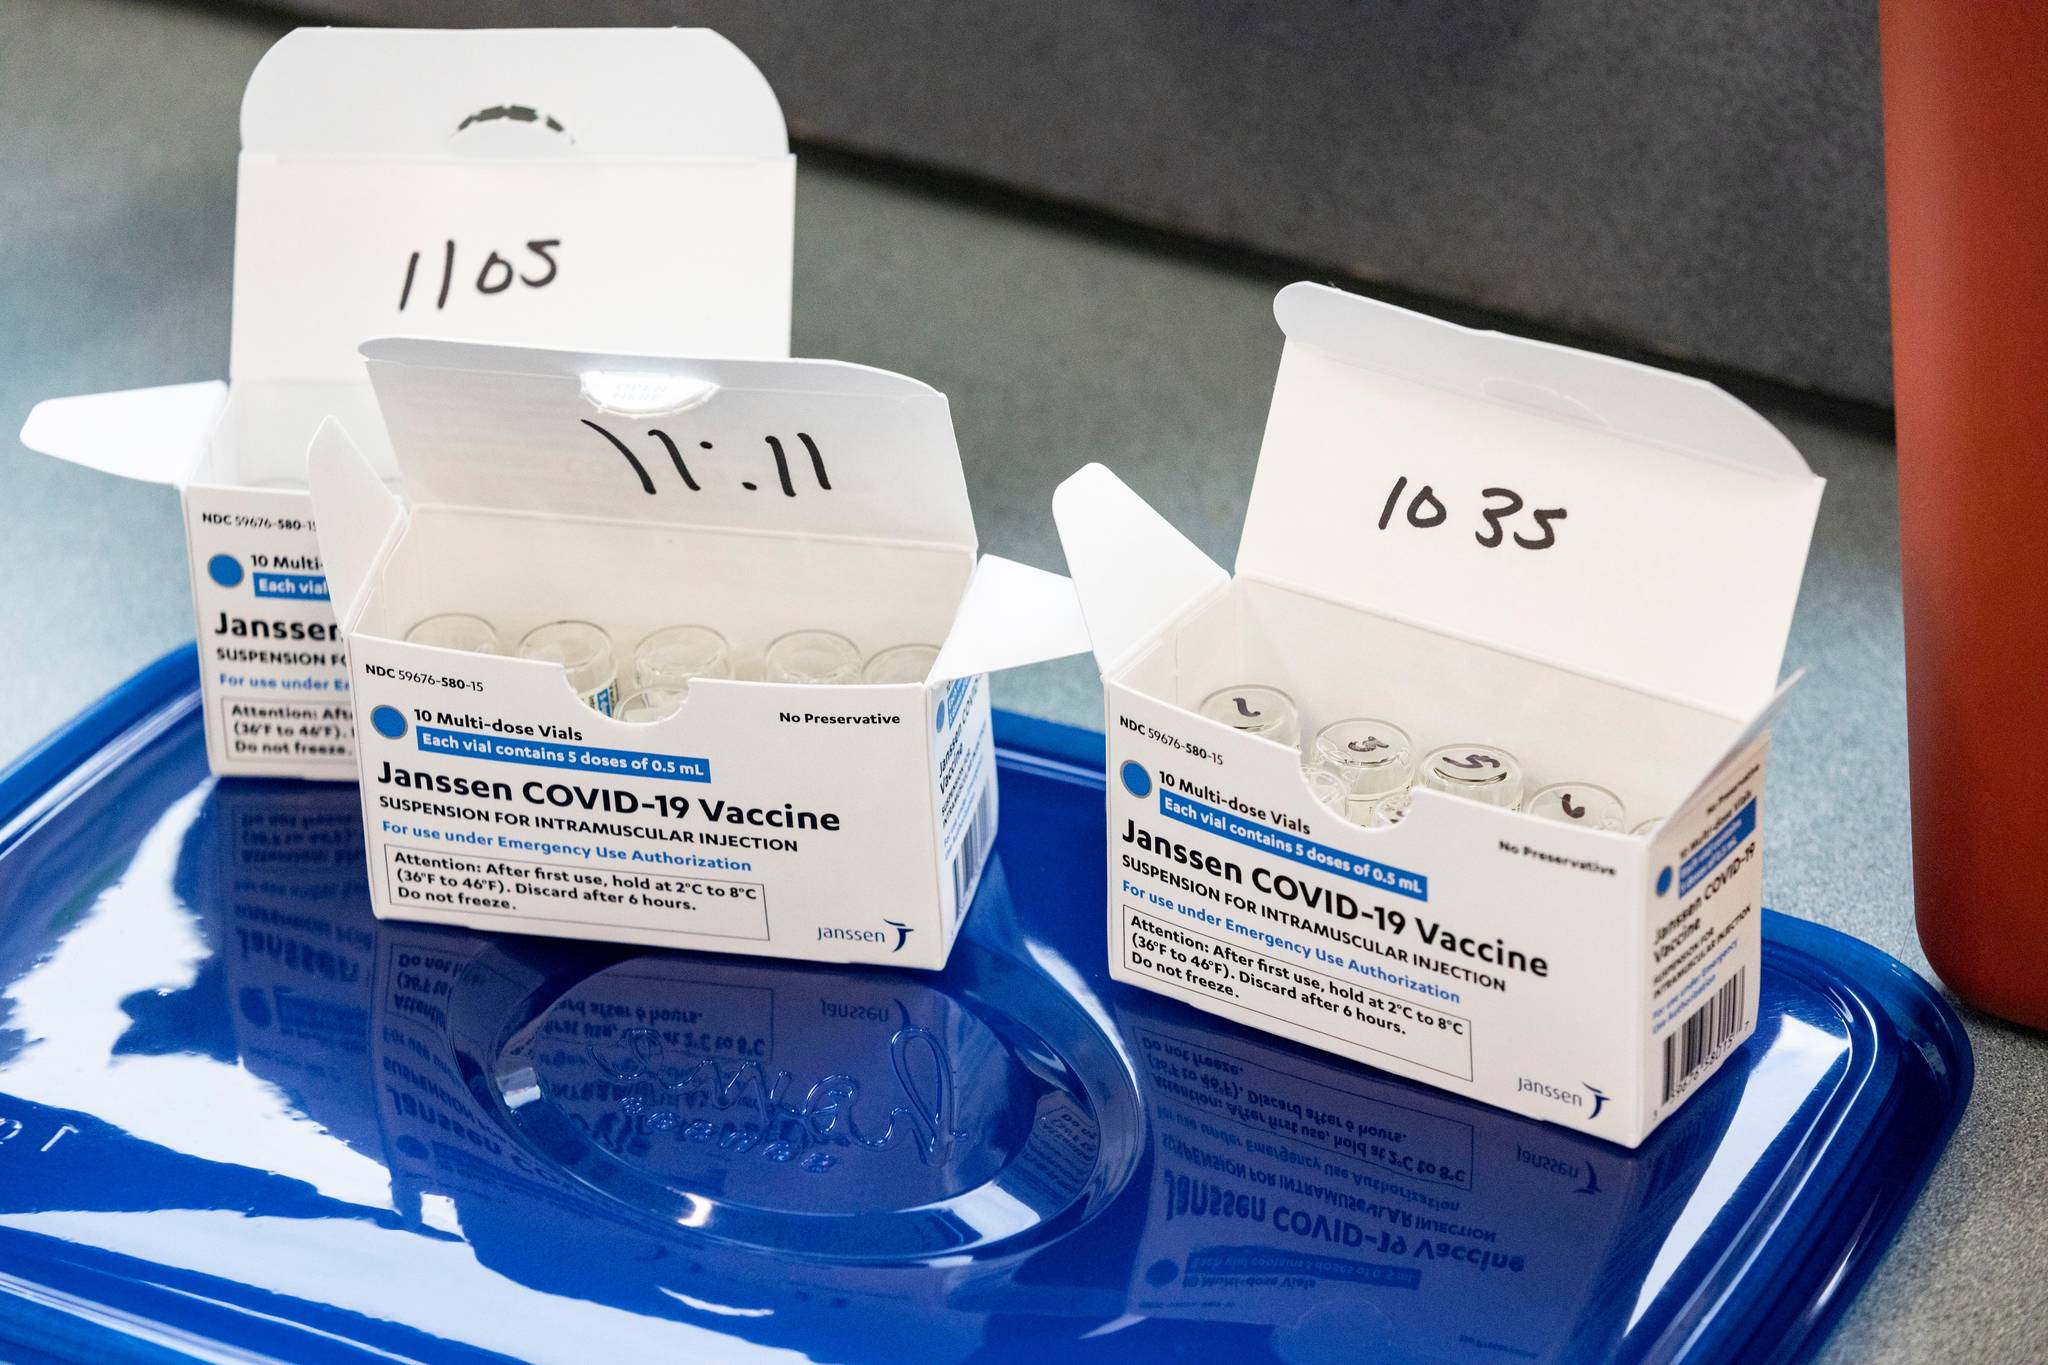 Stephen Zenner | Getty Images 
Boxes of the Covid-19 Johnson & Johnson Janssen vaccine.